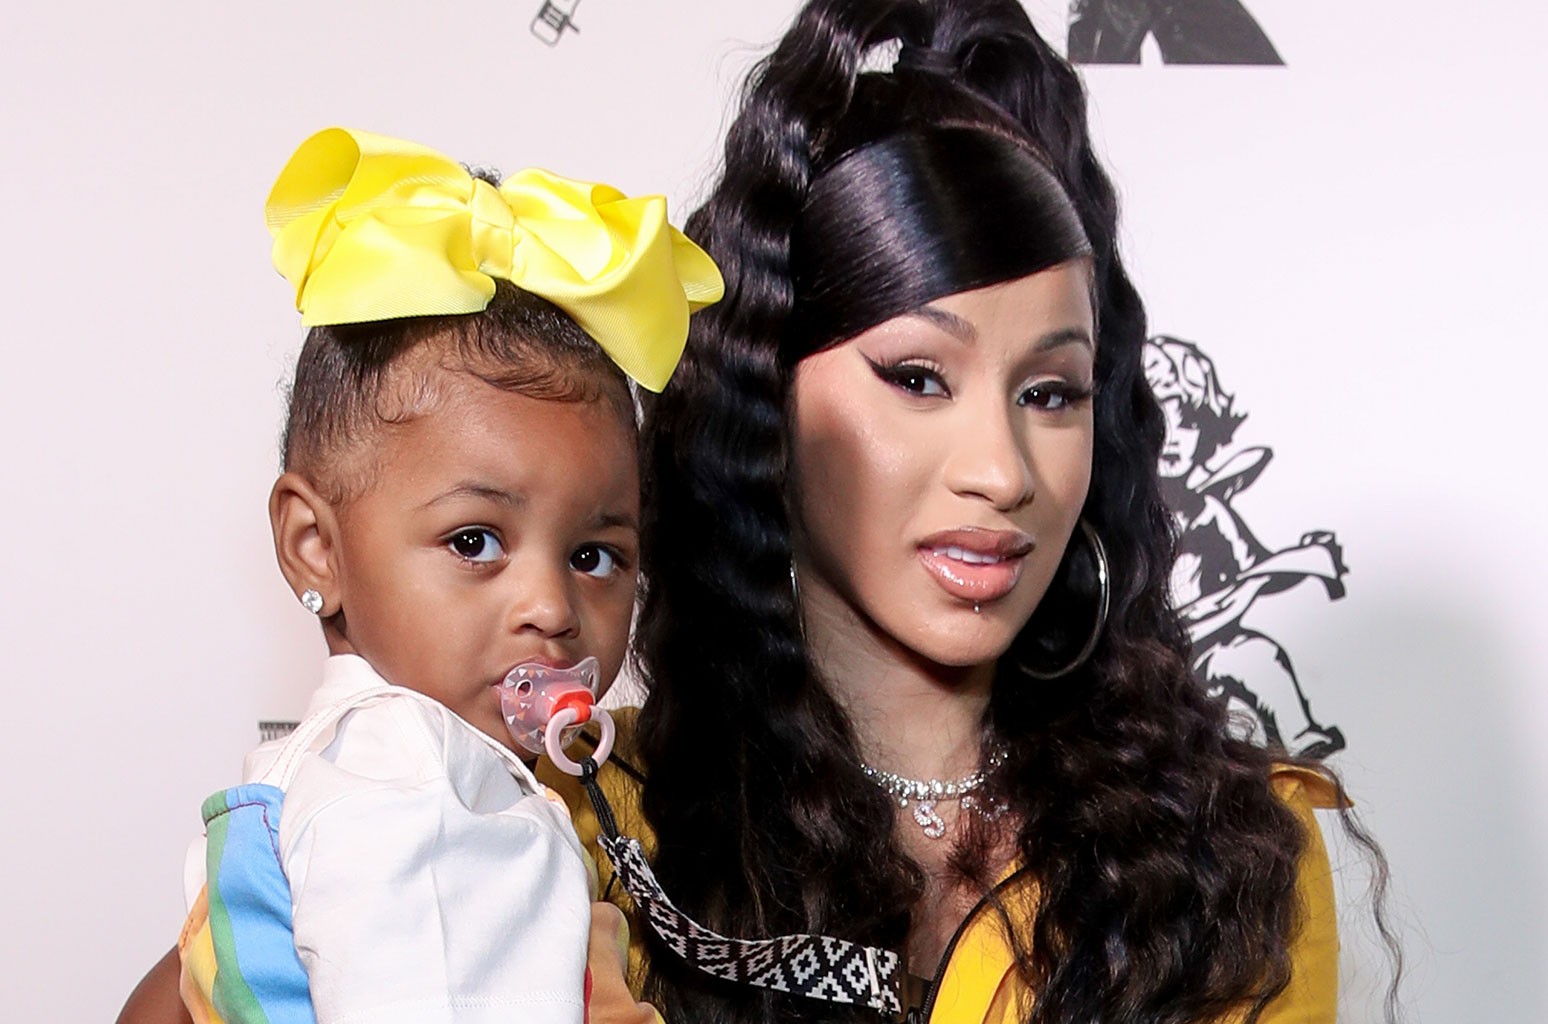 "WAP" Is for the Culture, Not Kulture: Cardi B Explains Why She Turned The Song Off In Front of Her Daughter In Viral Video